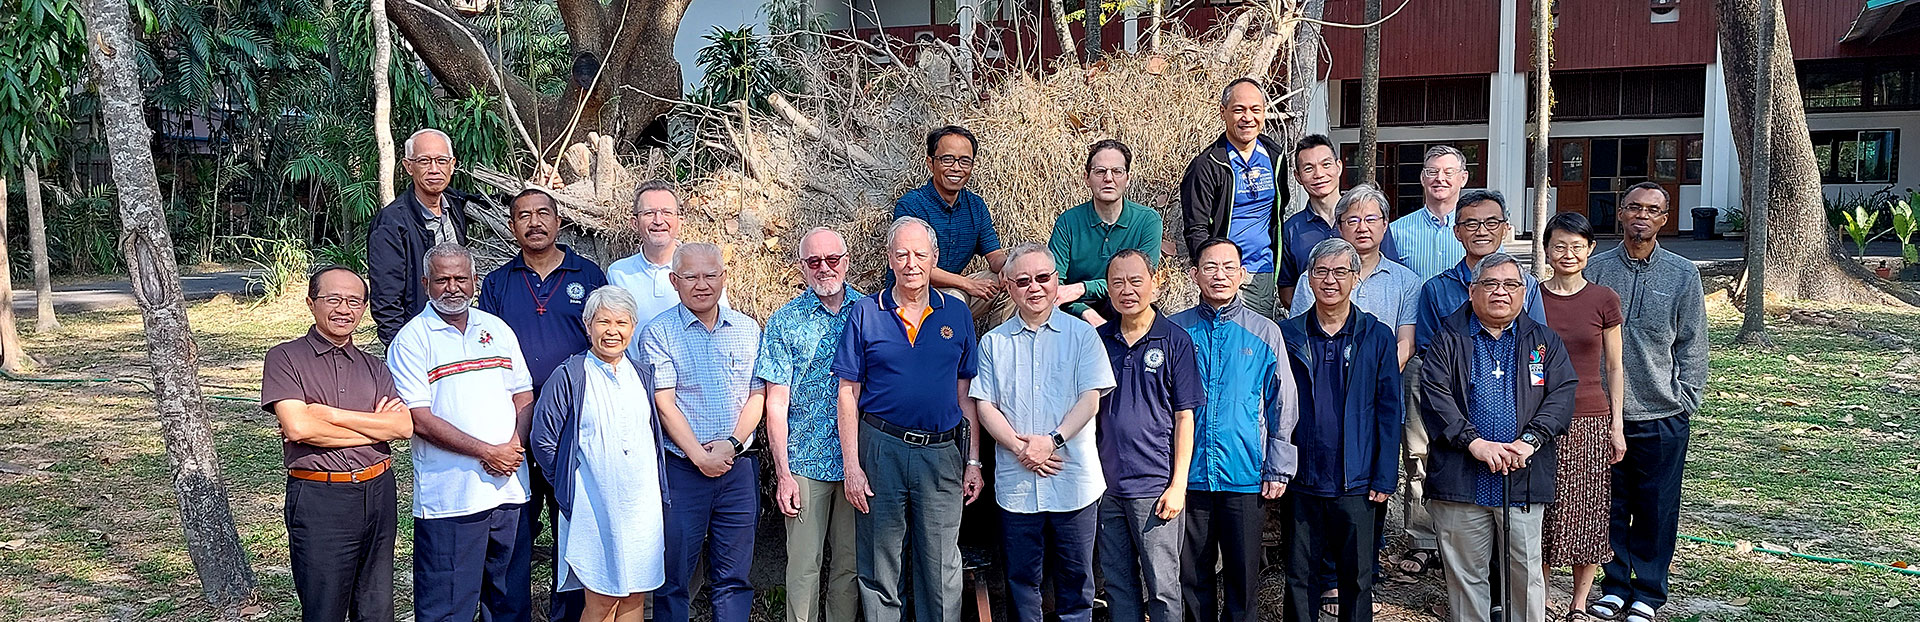 JCAP Major Superiors Assembly in Chiang Mai: looking at the present and guiding the future